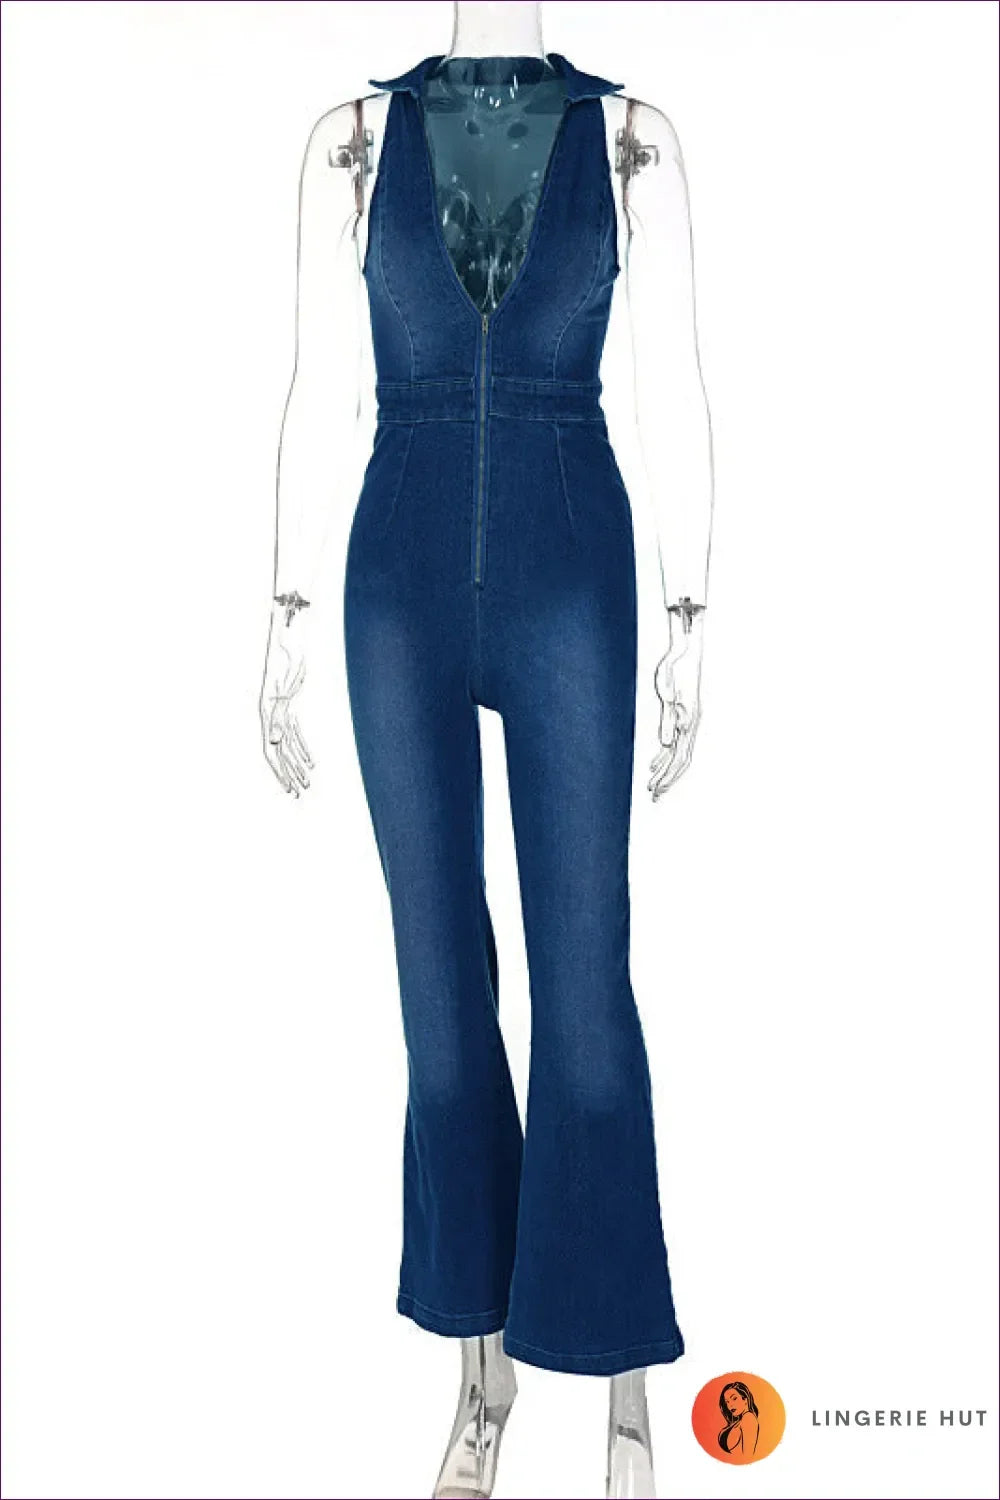 Step Into Elegance With Our Chic Denim Jumpsuit. Featuring a Regular Fit And High-quality Denim, This Jumpsuit